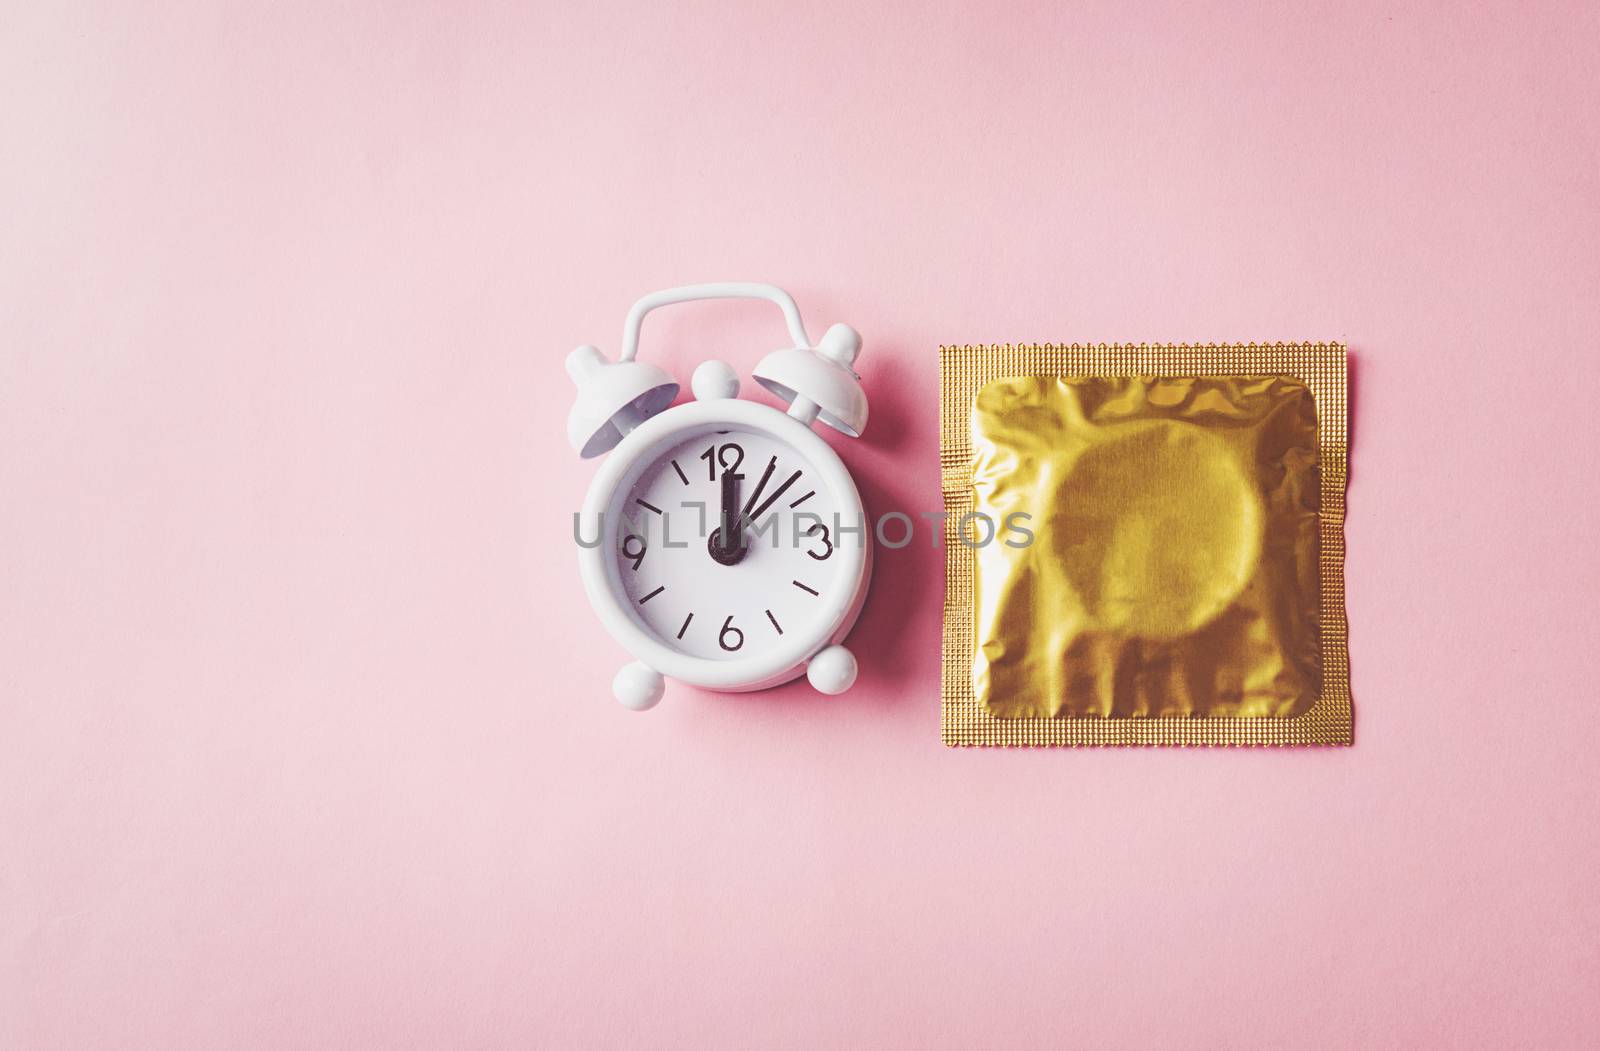 World sexual health or Aids day, condom in wrapper pack and Alarm clock birth control, studio shot isolated on a pink background, Safe sex and reproductive health concept